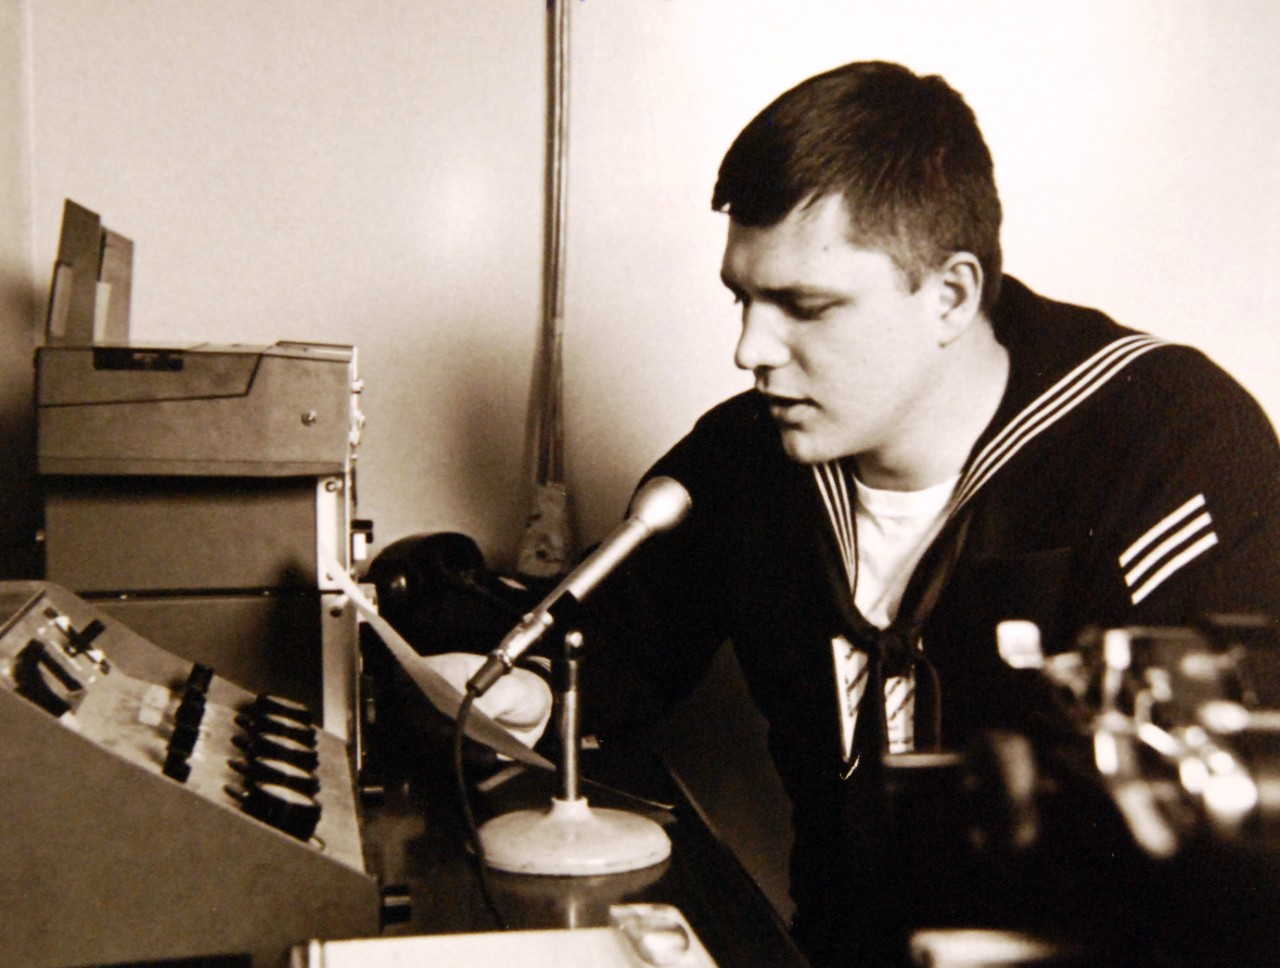 428-GX-USN-1140145:   U.S. Naval Station, San Diego, California, February 27, 1969.    A sailor at work in the command information bureau.  Information on the work of the Court of Inquiry on the capture of USS Pueblo (AGER-2) is being handled by the bureau.  Photographed by JOSN J.W. Fletcher, USN.   Official U.S. Navy Photograph, now in the collections of the National Archives (2017/05/23).  Photographed from reference card.  